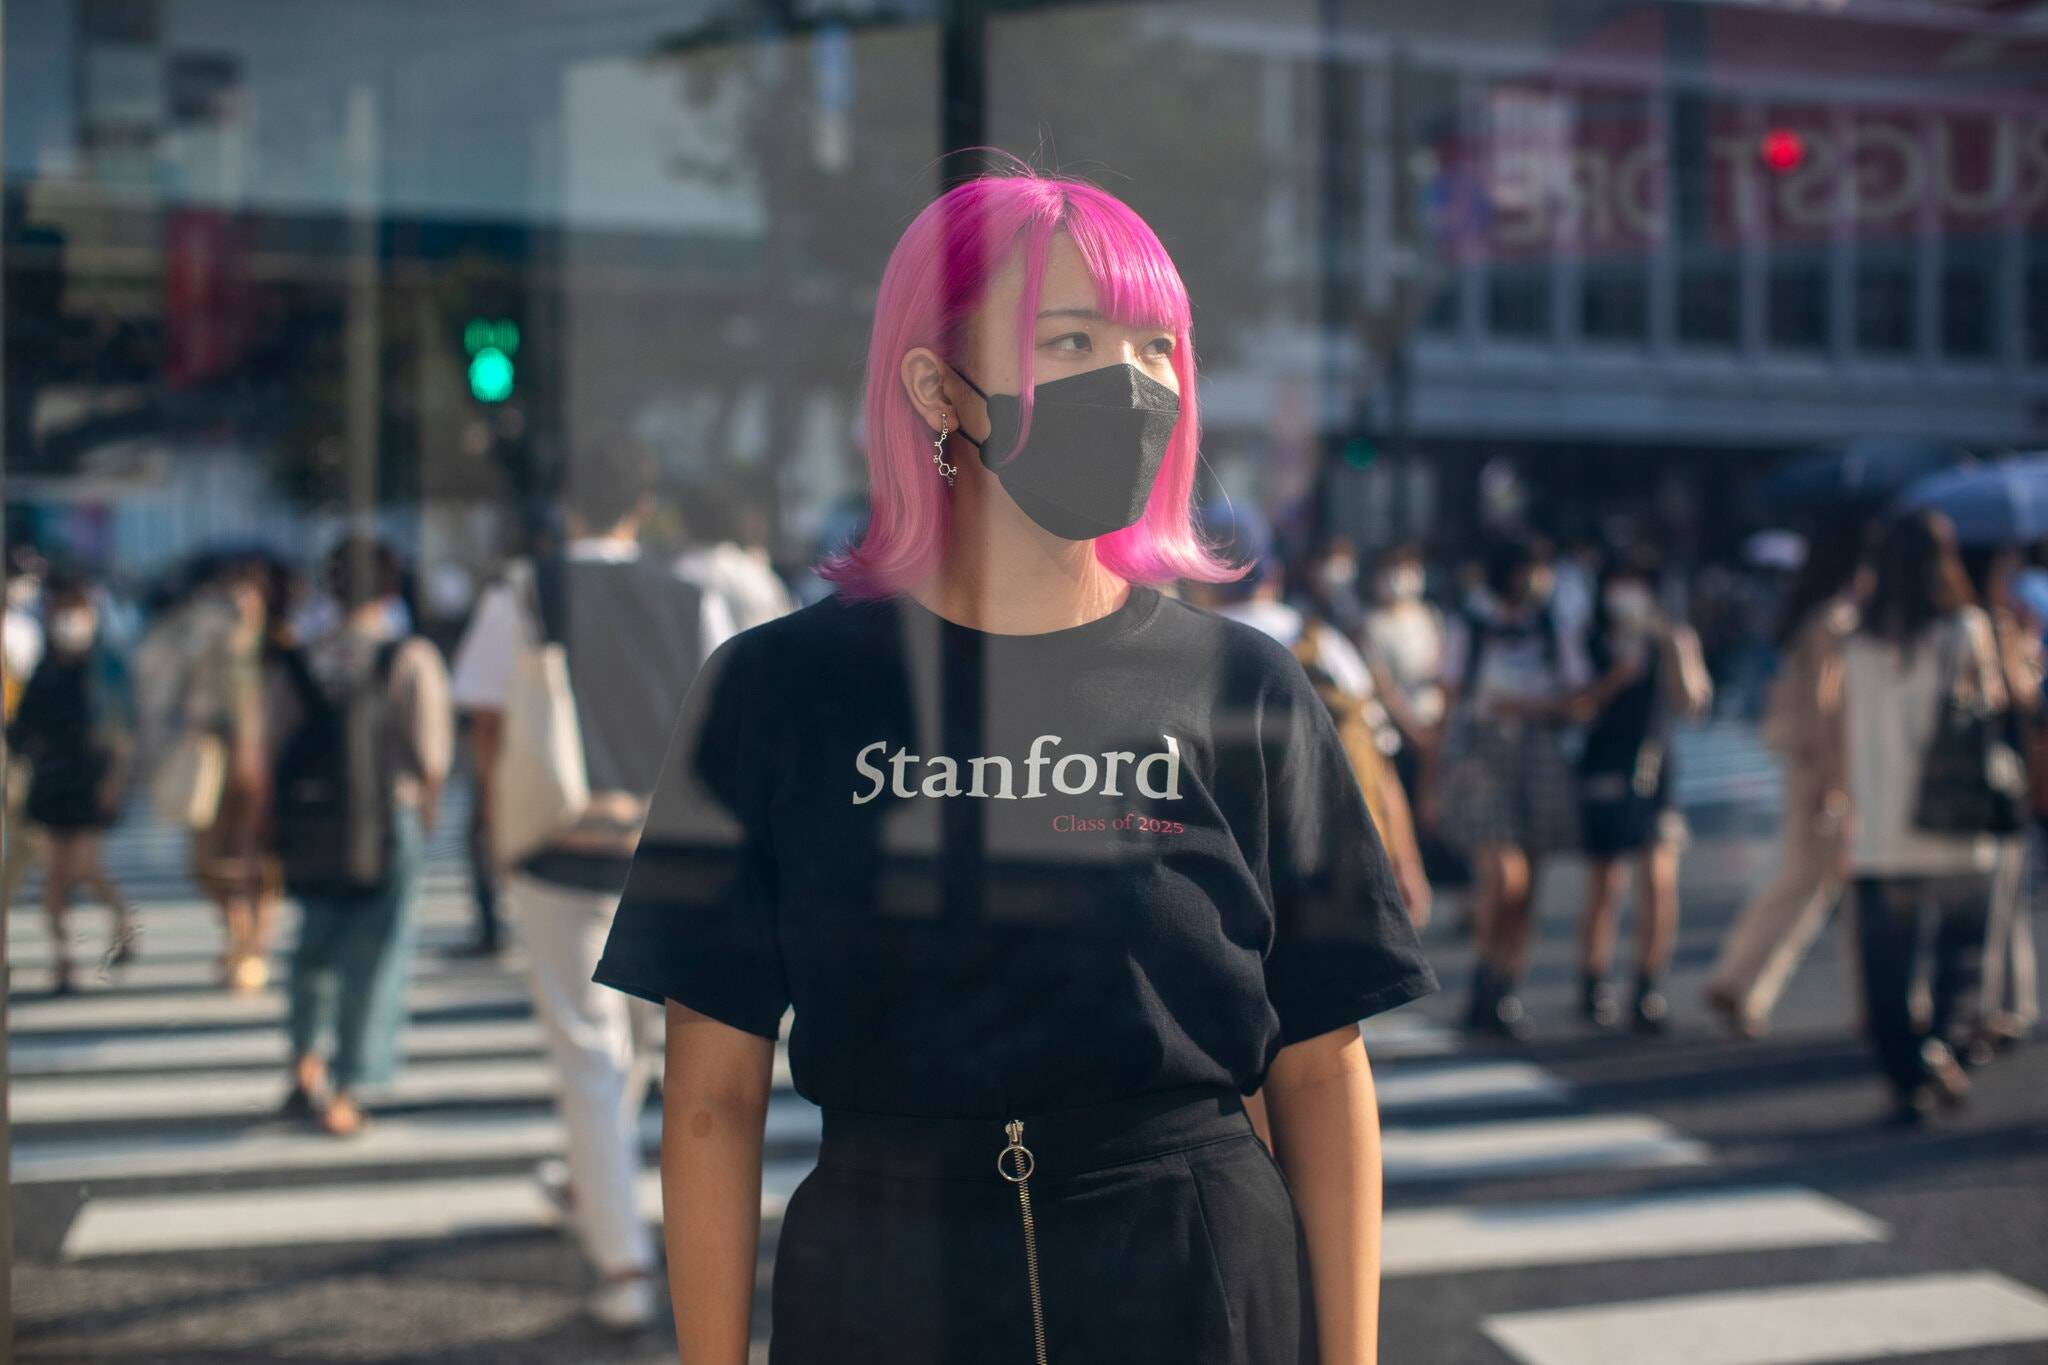 Anna Matsumoto is headed to Stanford to study engineering. A bit of a rebel against Japan’s cultural expectations, she dyed her hair after her graduation. | SHIHO FUKADA / THE NEW YORK TIMES